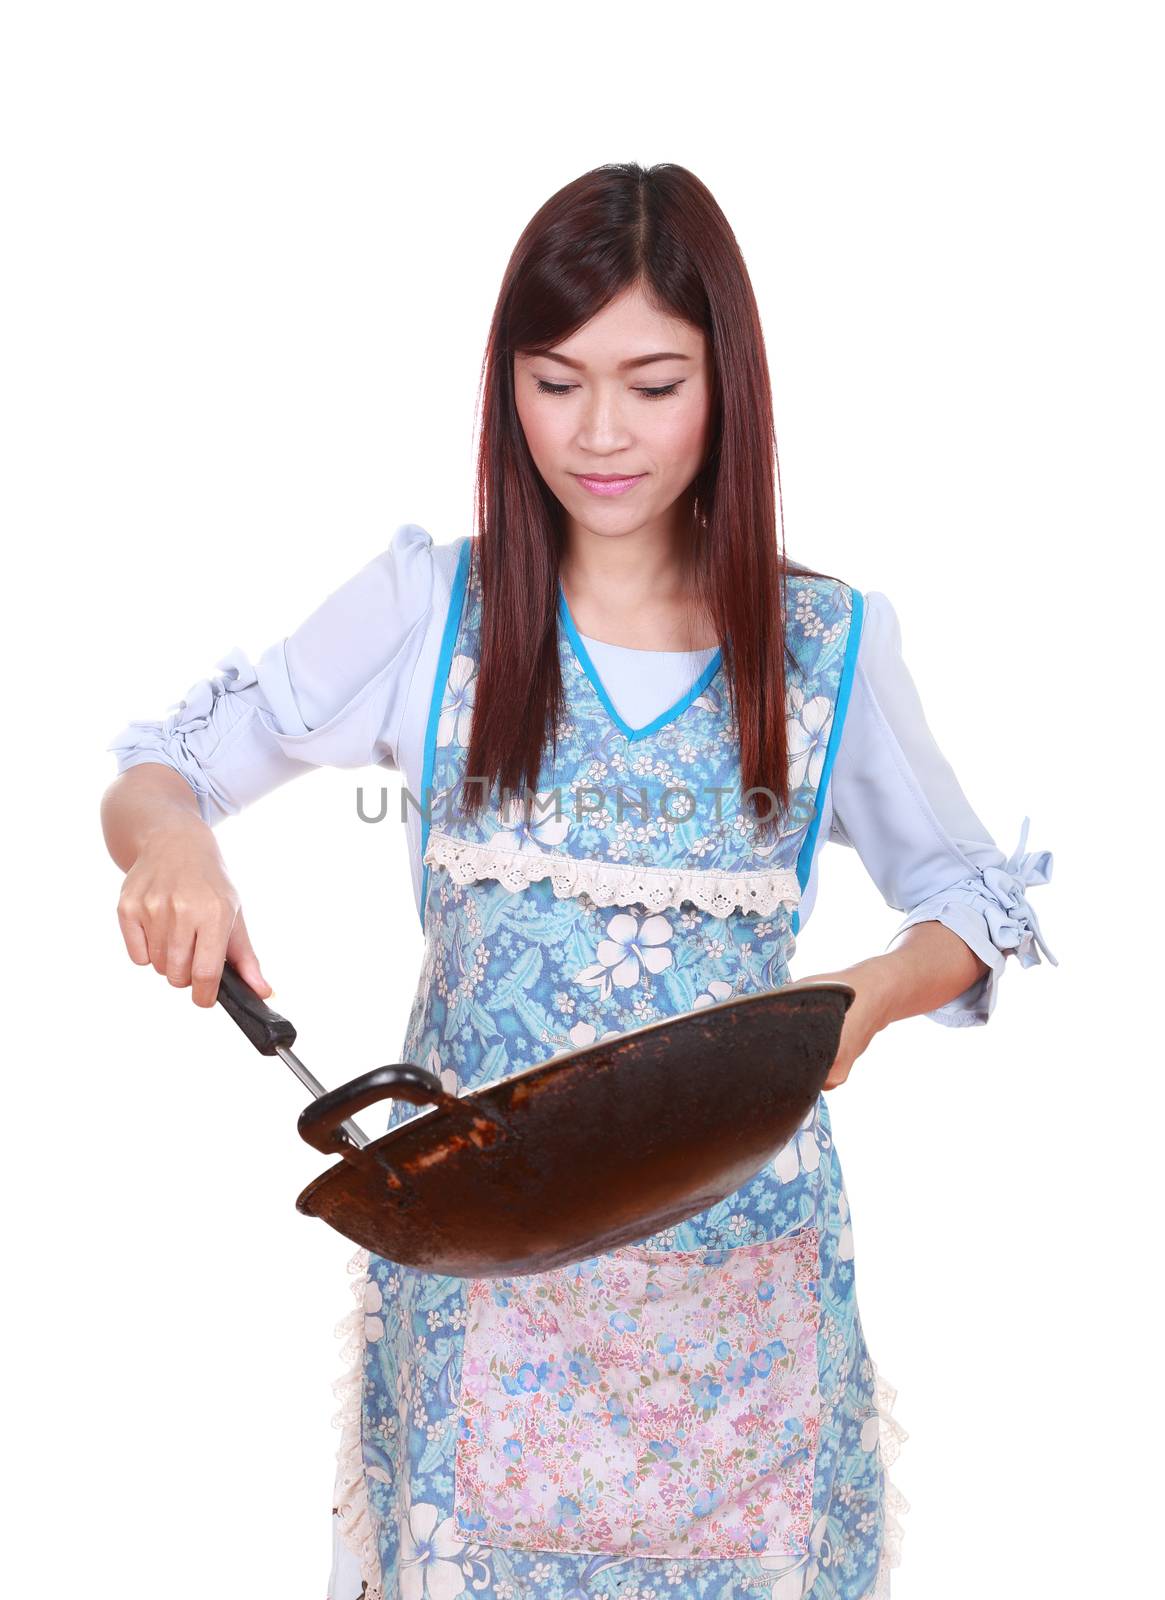 female chef holding the frying pan isolated on white background